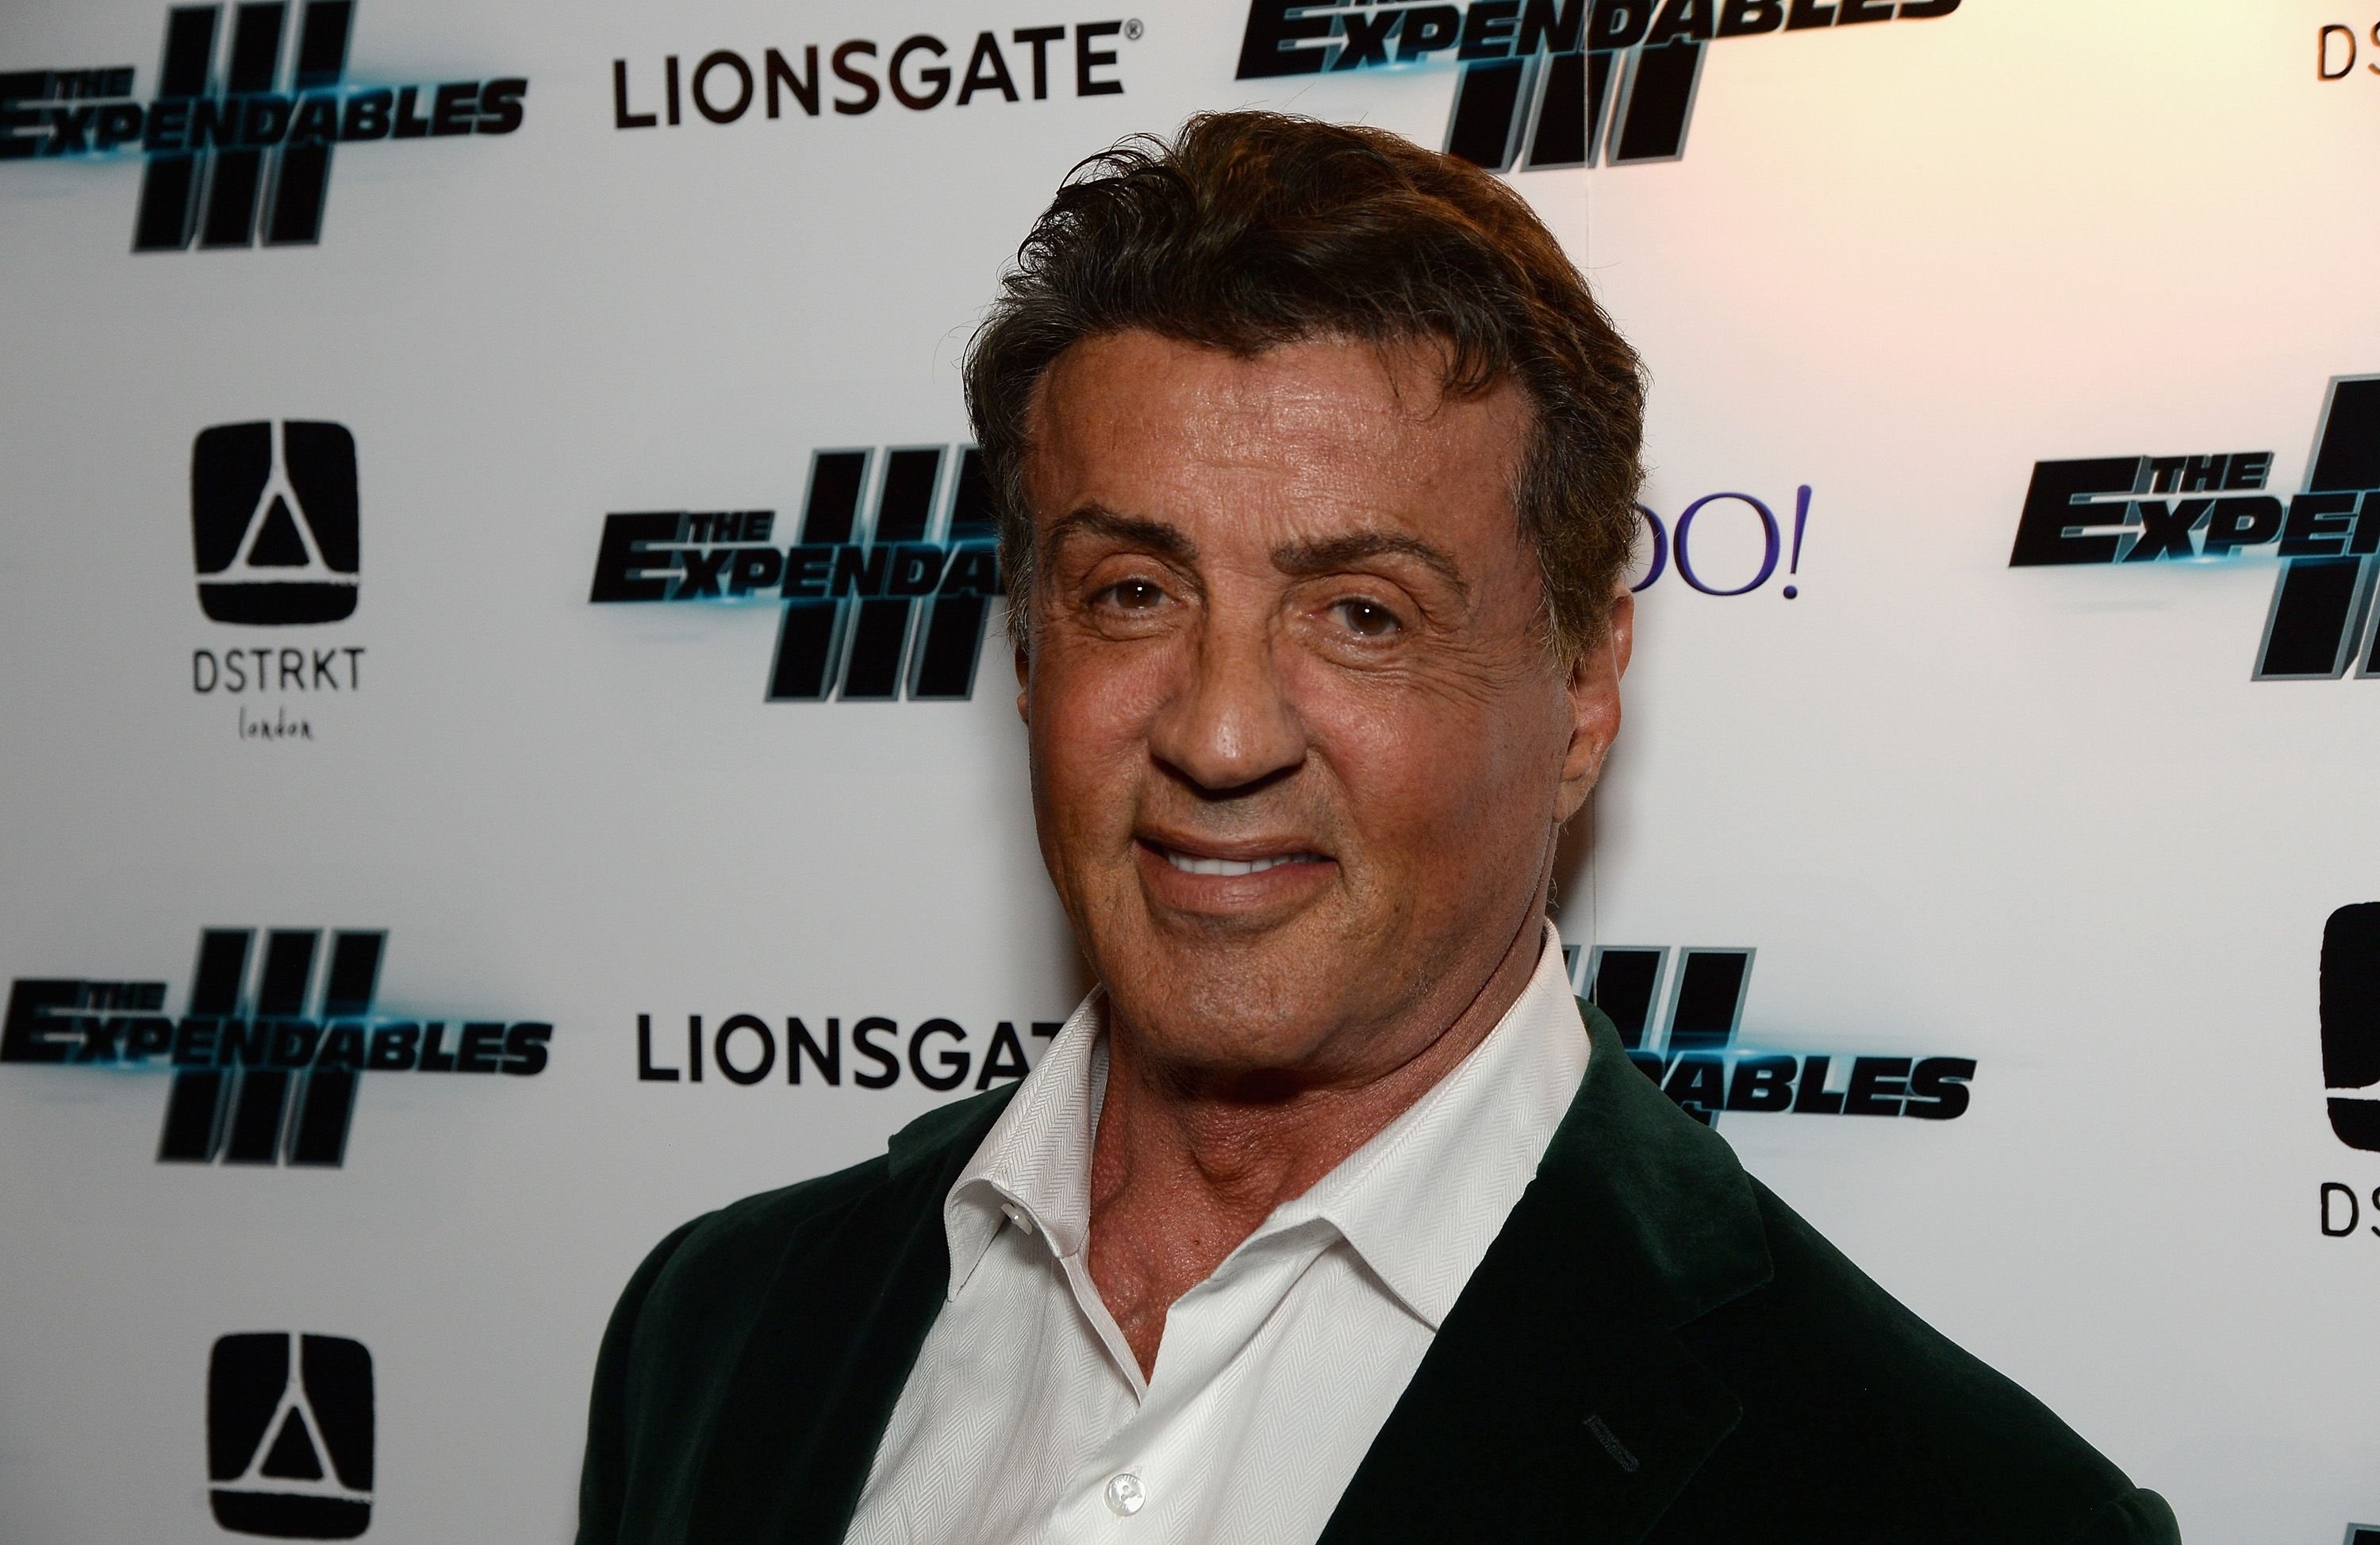 Sylvester Stallone during "The Expendables 3" after party at Dstrkt on August 4, 2014 in London, England. The Expendables 3 is released on August 14, 2014. | Source: Getty Images